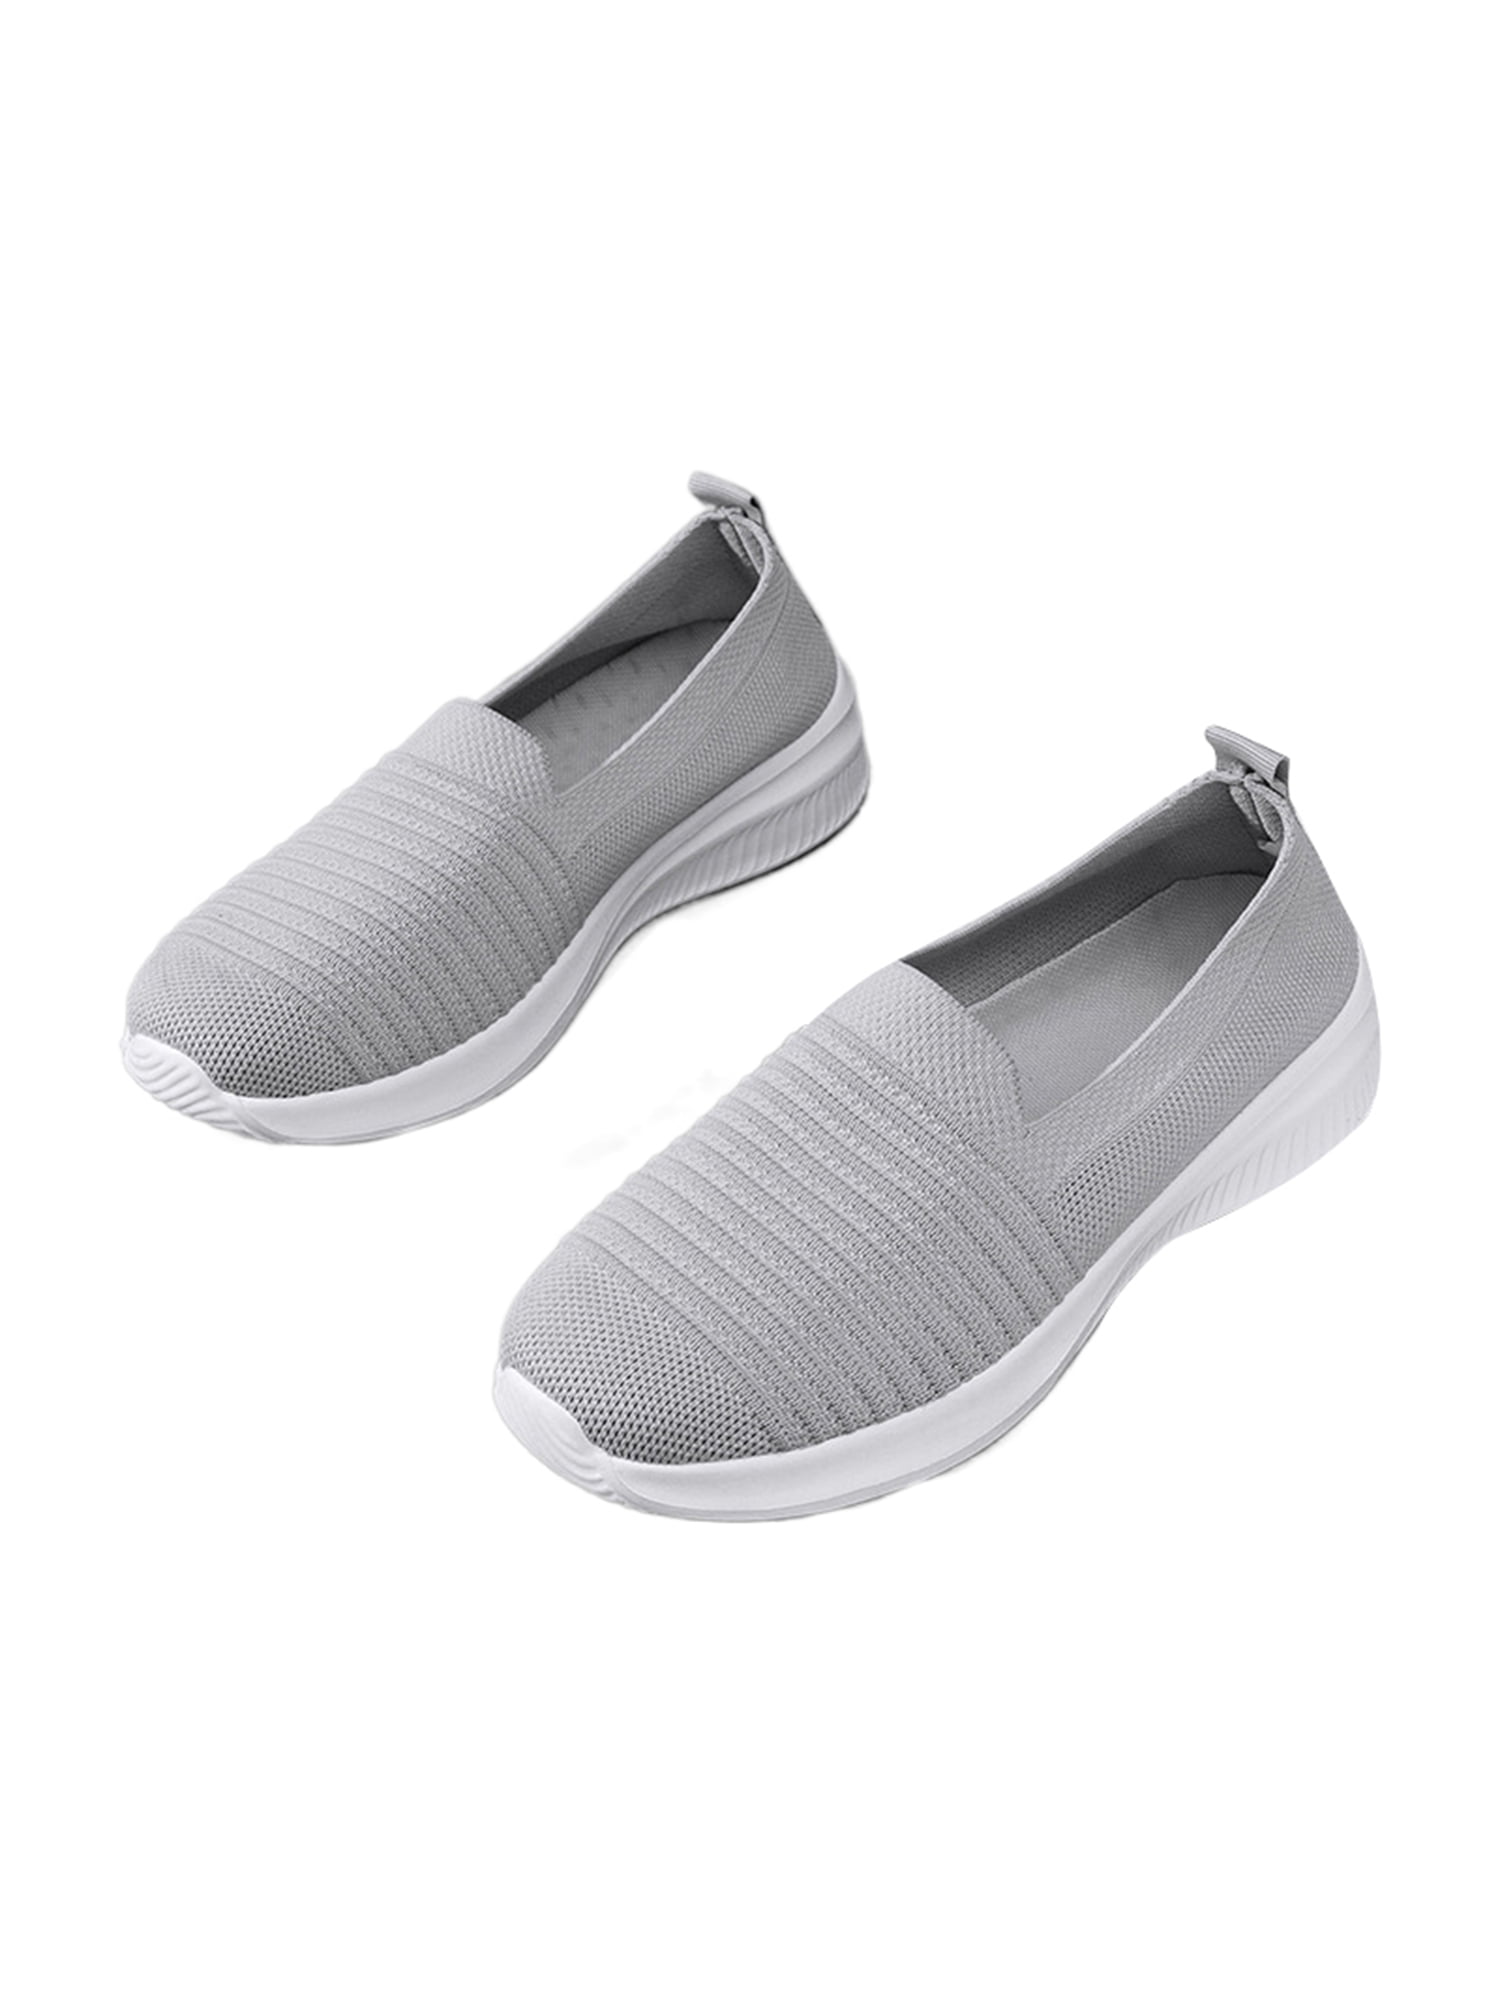 Details about   Ladies Womens Flat Slip On Canvas Style Non Slip Walking Work Comfort Shoes Size 